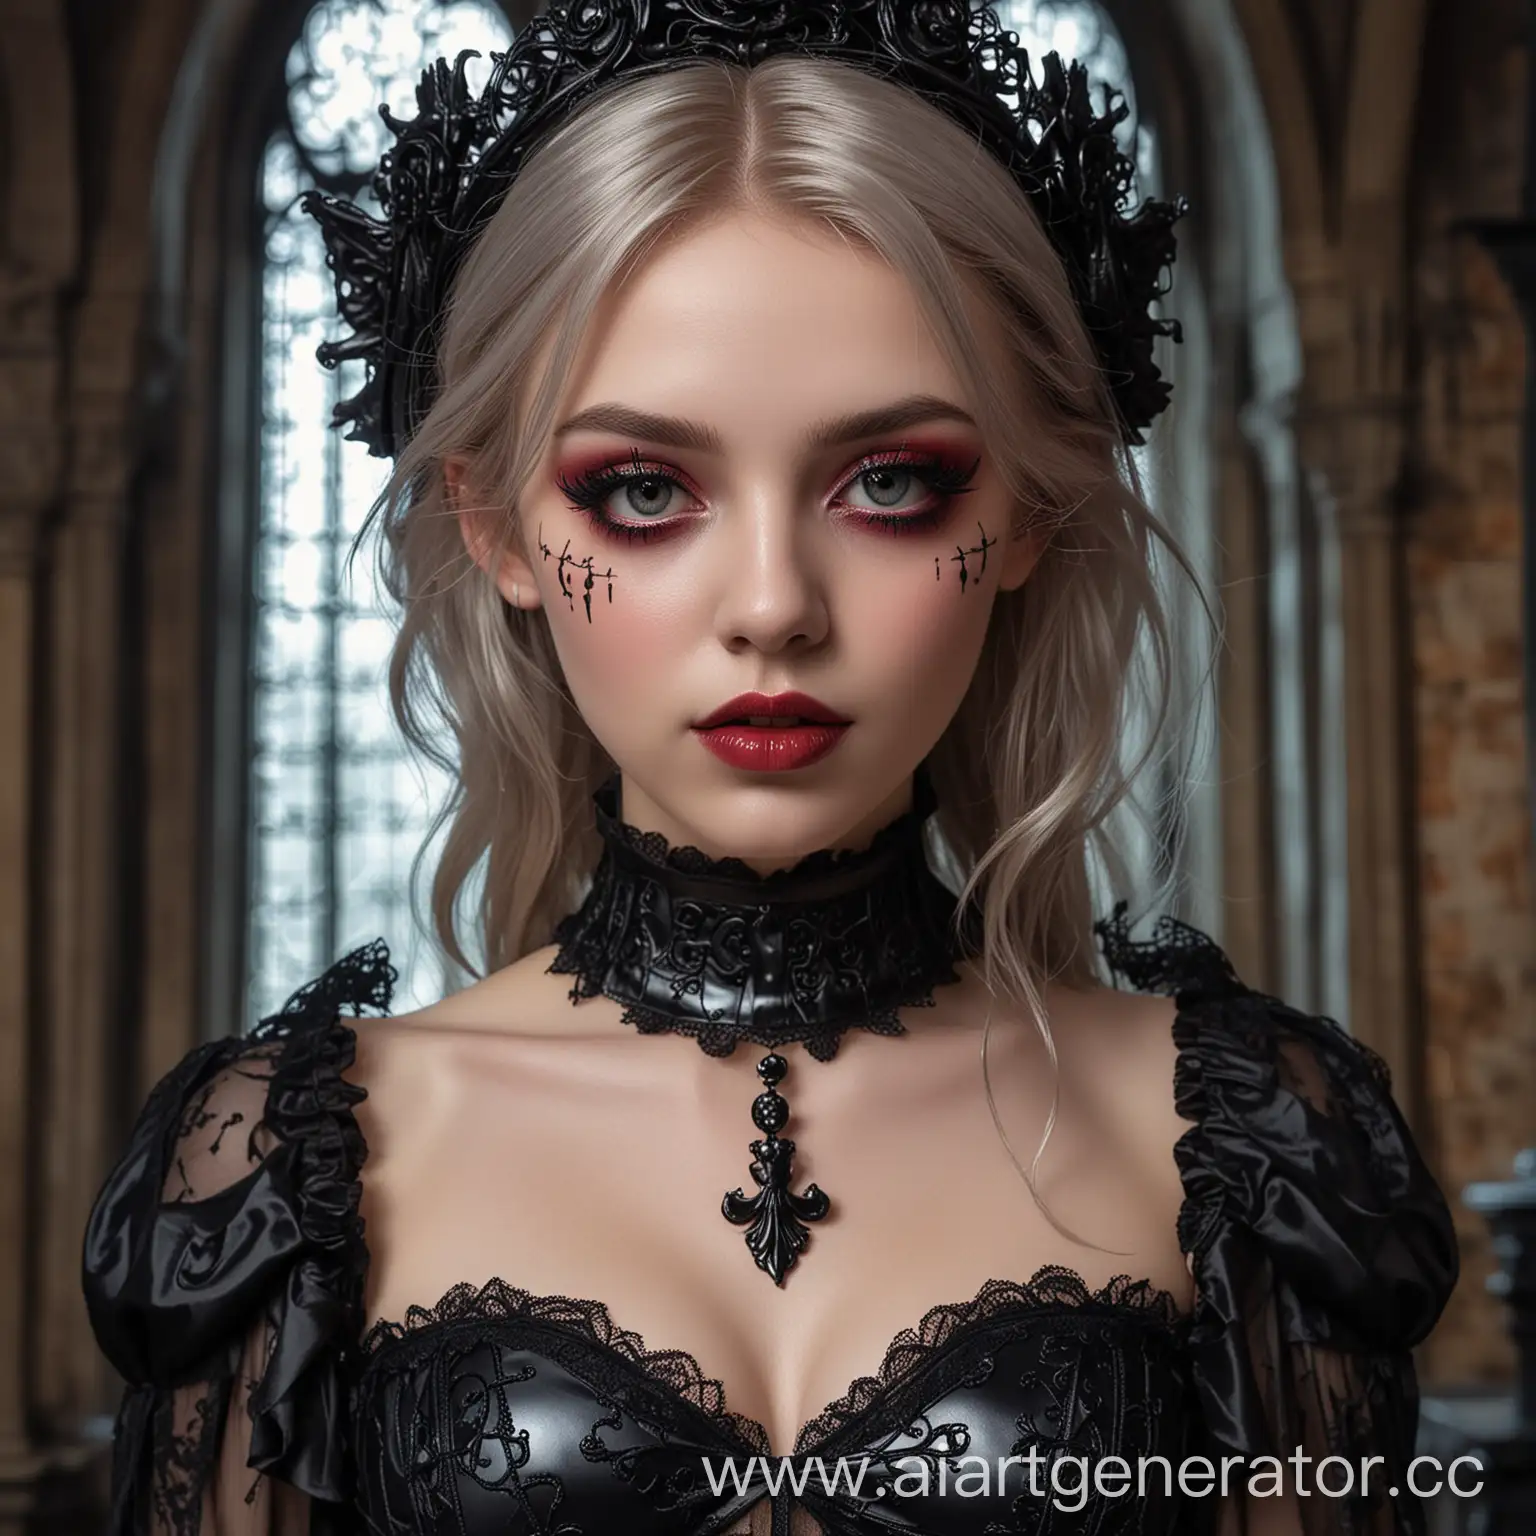 Seductive-NeoGothic-Girl-in-Revealing-Attire-Sensual-Pose-with-Bright-Makeup